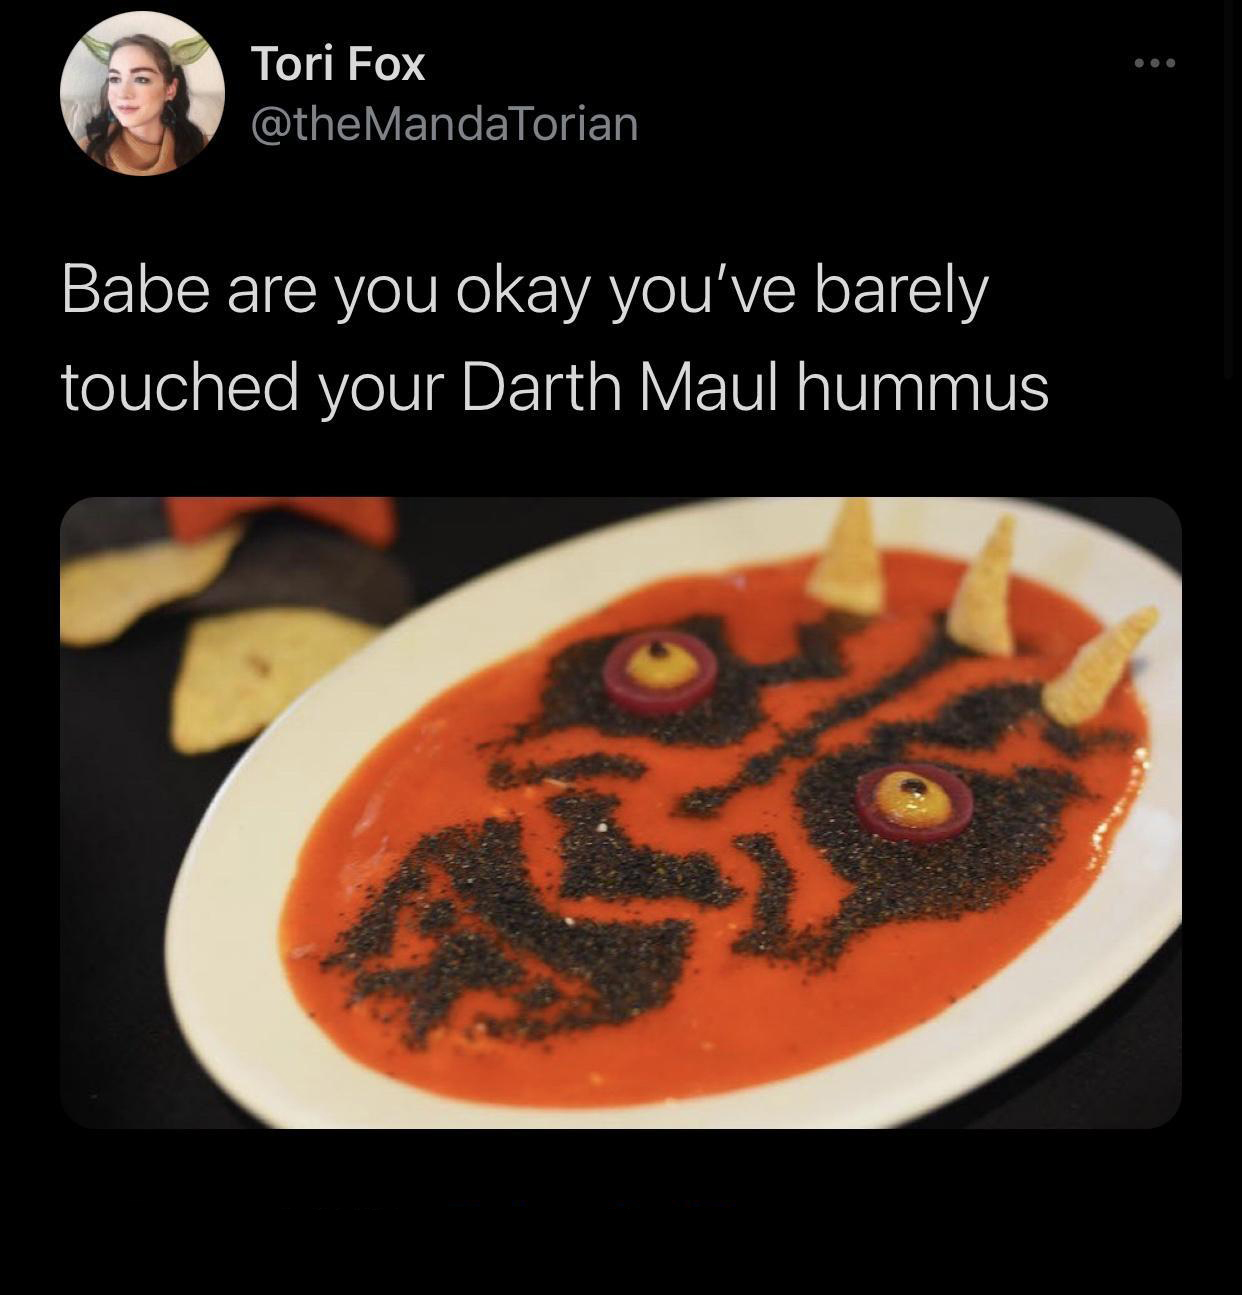 monday morning randomness - darth maul hummus - Tori Fox Babe are you okay you've barely touched your Darth Maul hummus